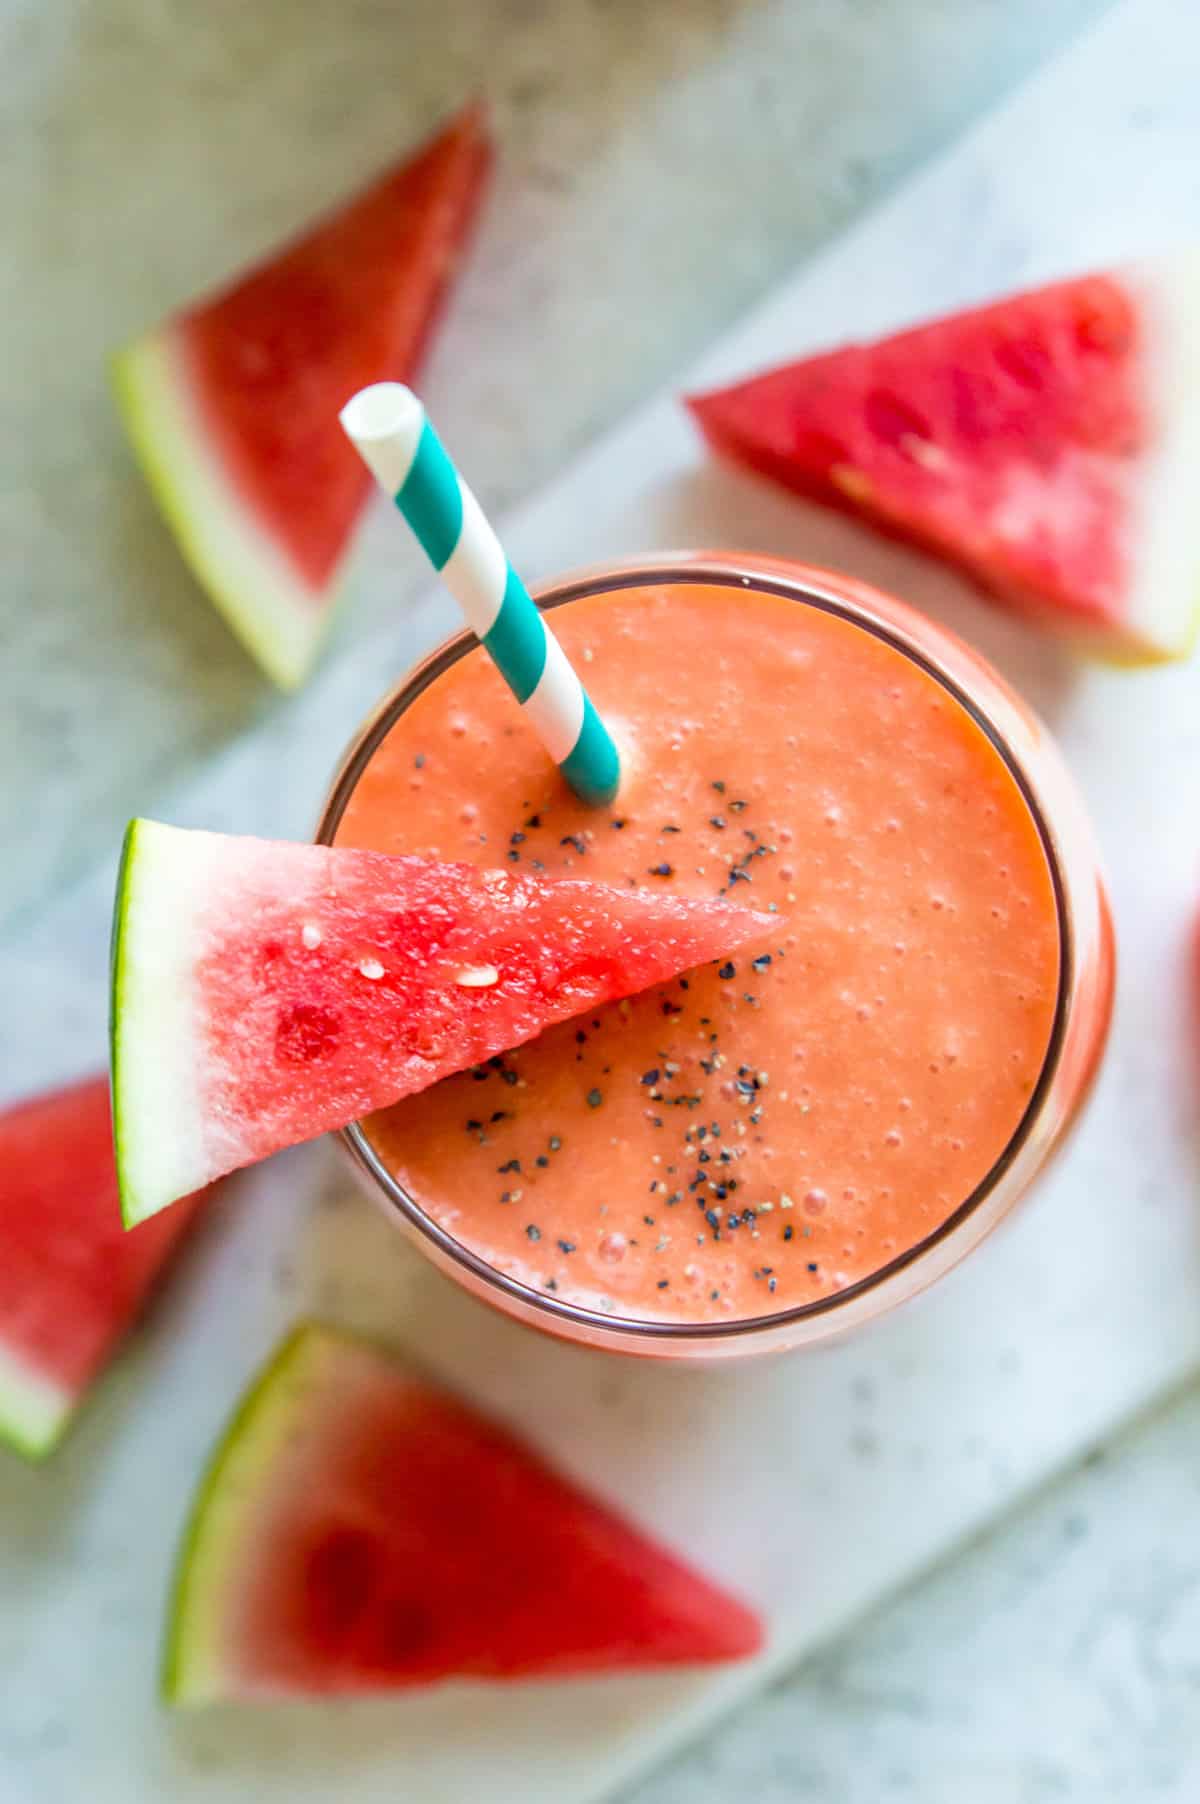 A watermelon banana smoothie in a glass with a straw and a piece of watermelon on top.